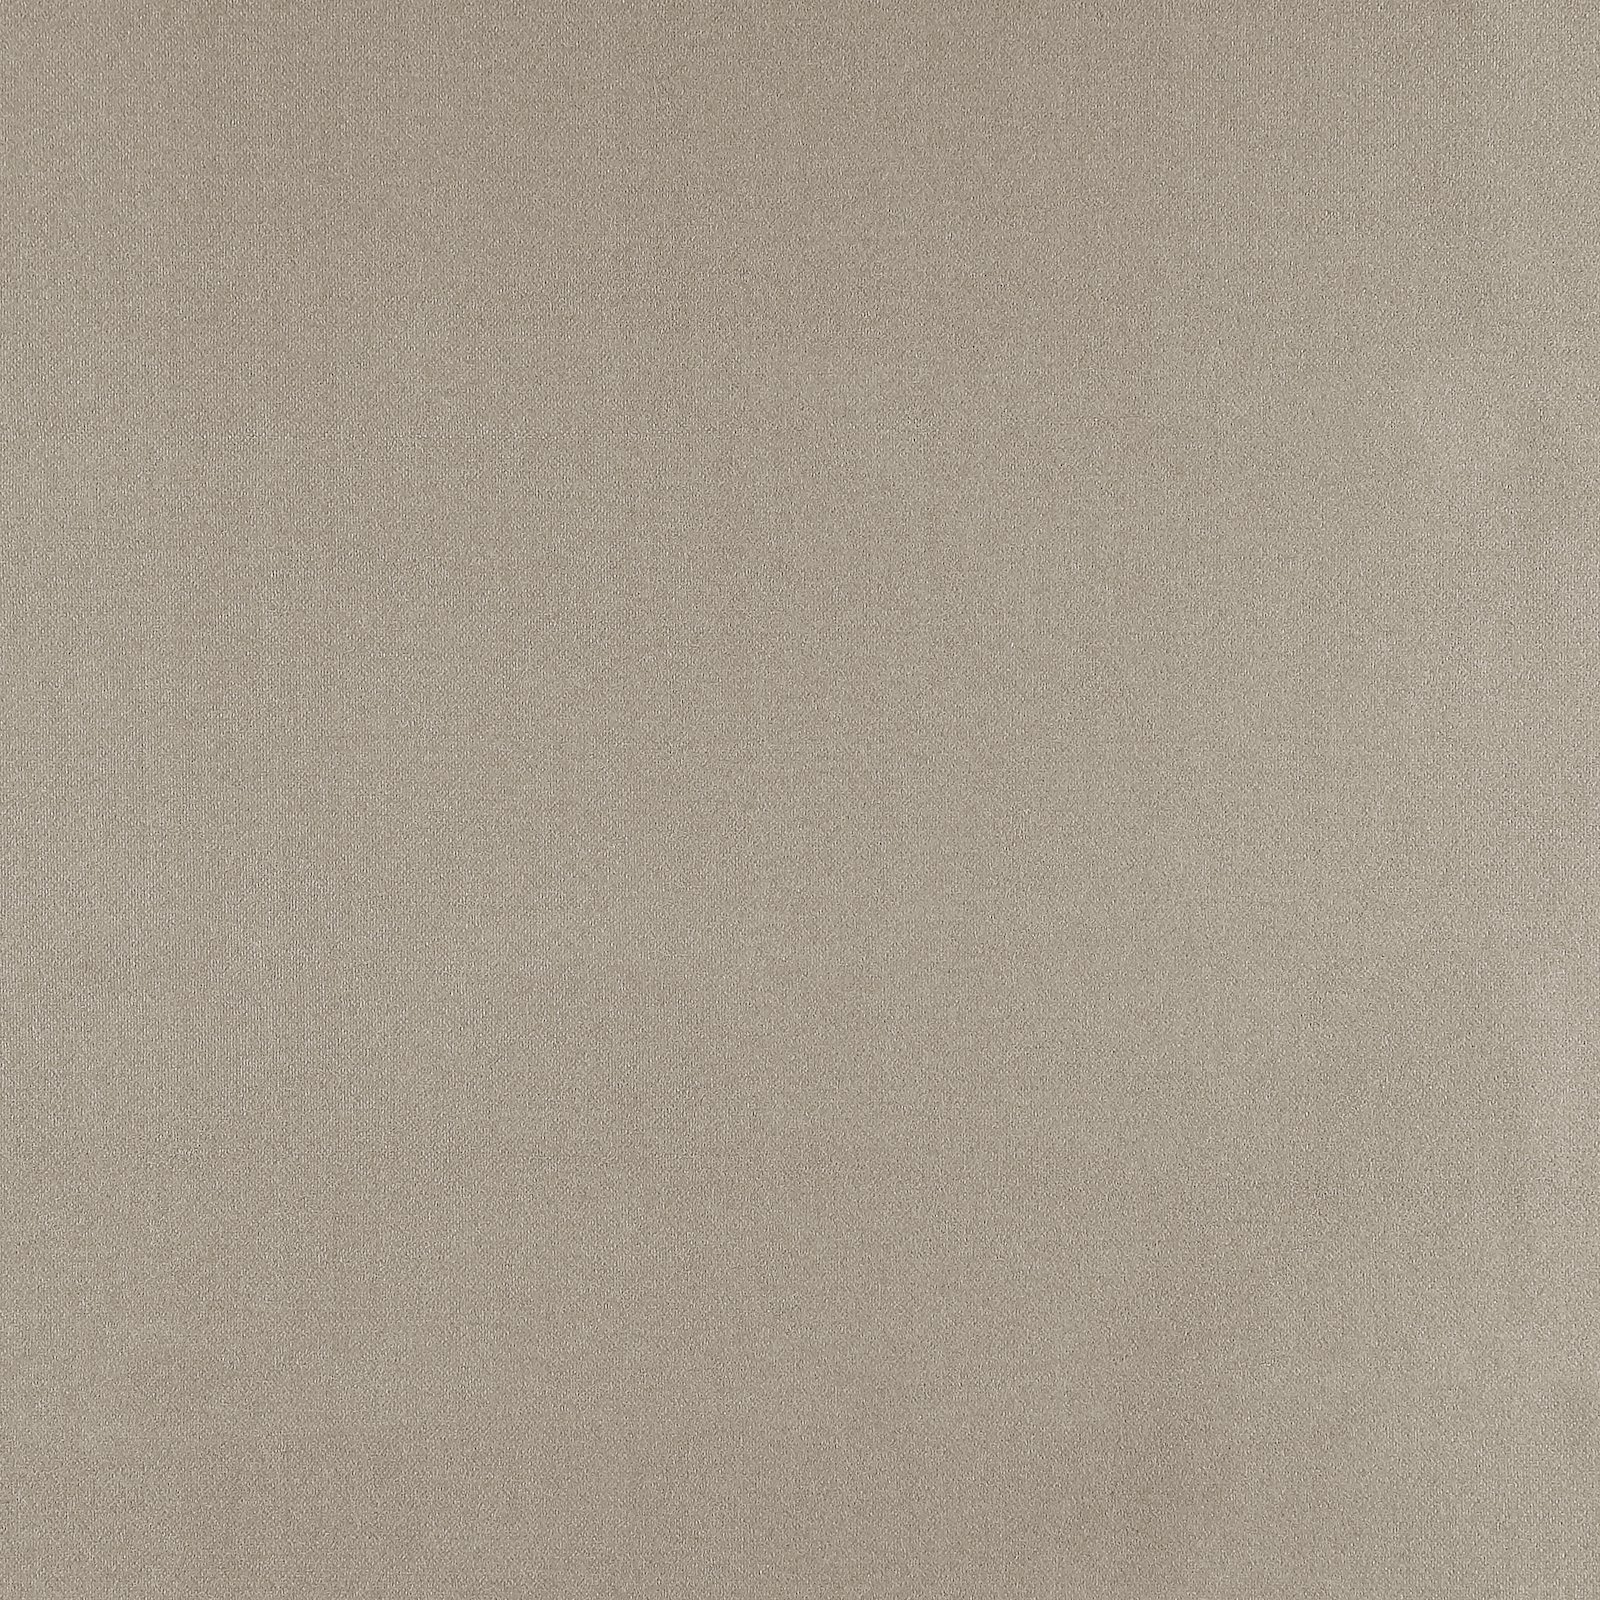 Upholstery fabric light grey 822231_pack_solid